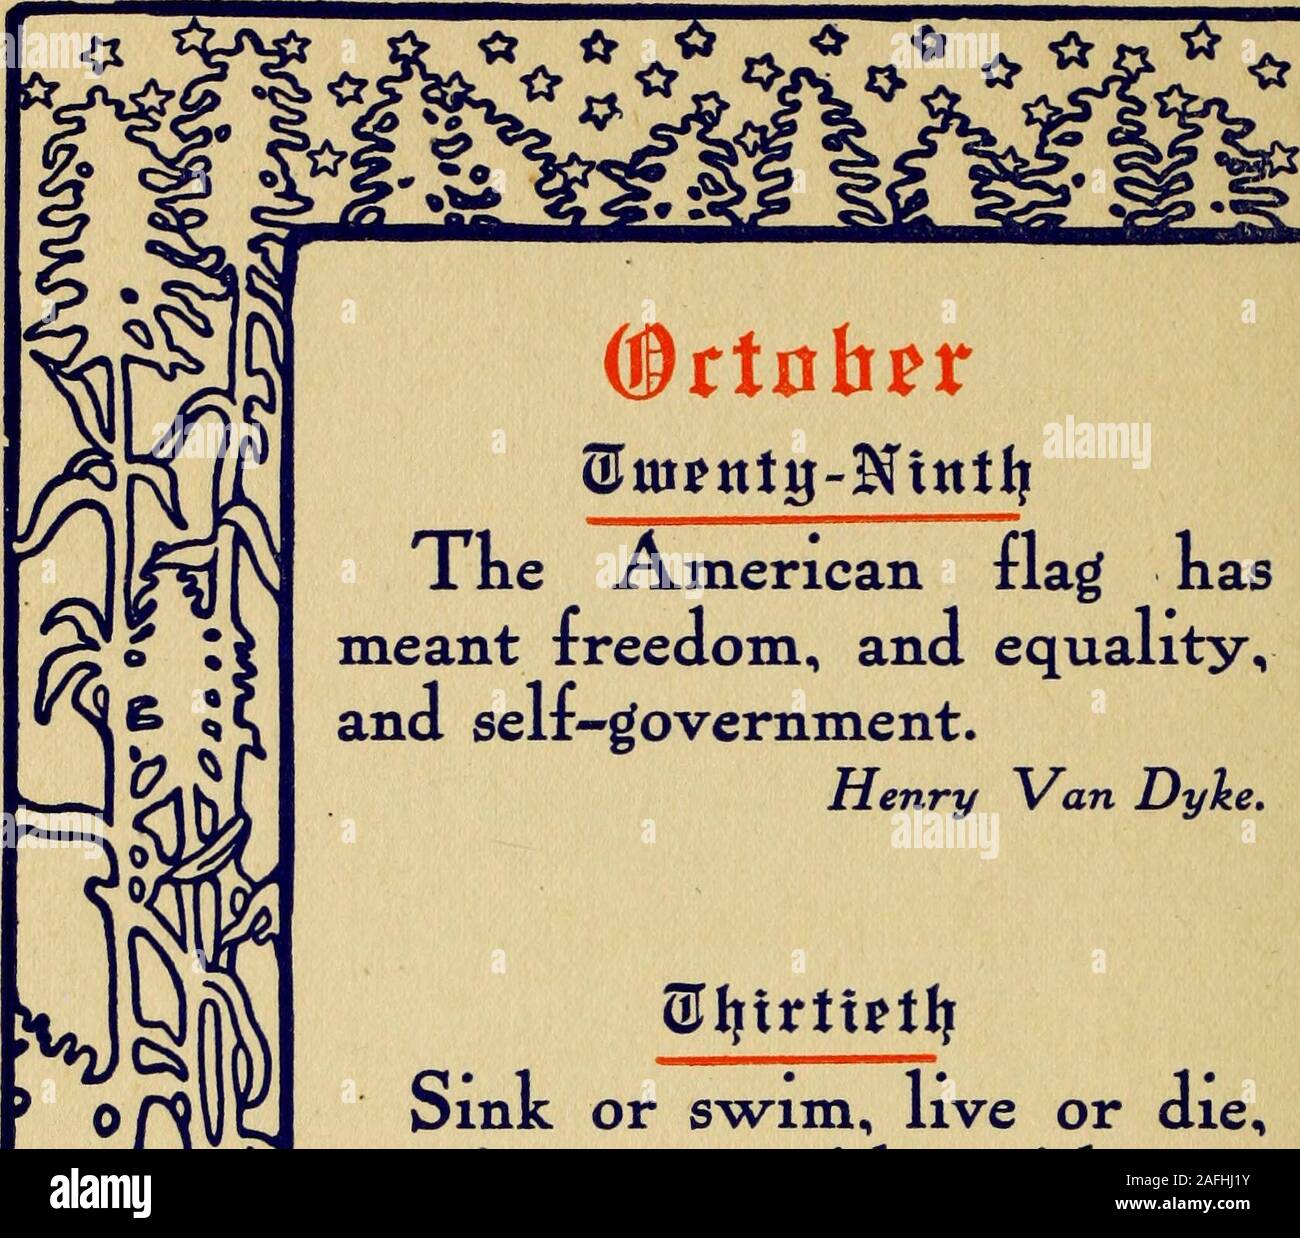 . Catch words of patriotism. (§tiabtx The American flag hasmeant freedom, ana equality,and self-government. Henry Van Dyke. gtfrtrttgtfr Sink or swim, live or die,survive or perisn with mycountry. John Adams, horn 1735. Stock Photo